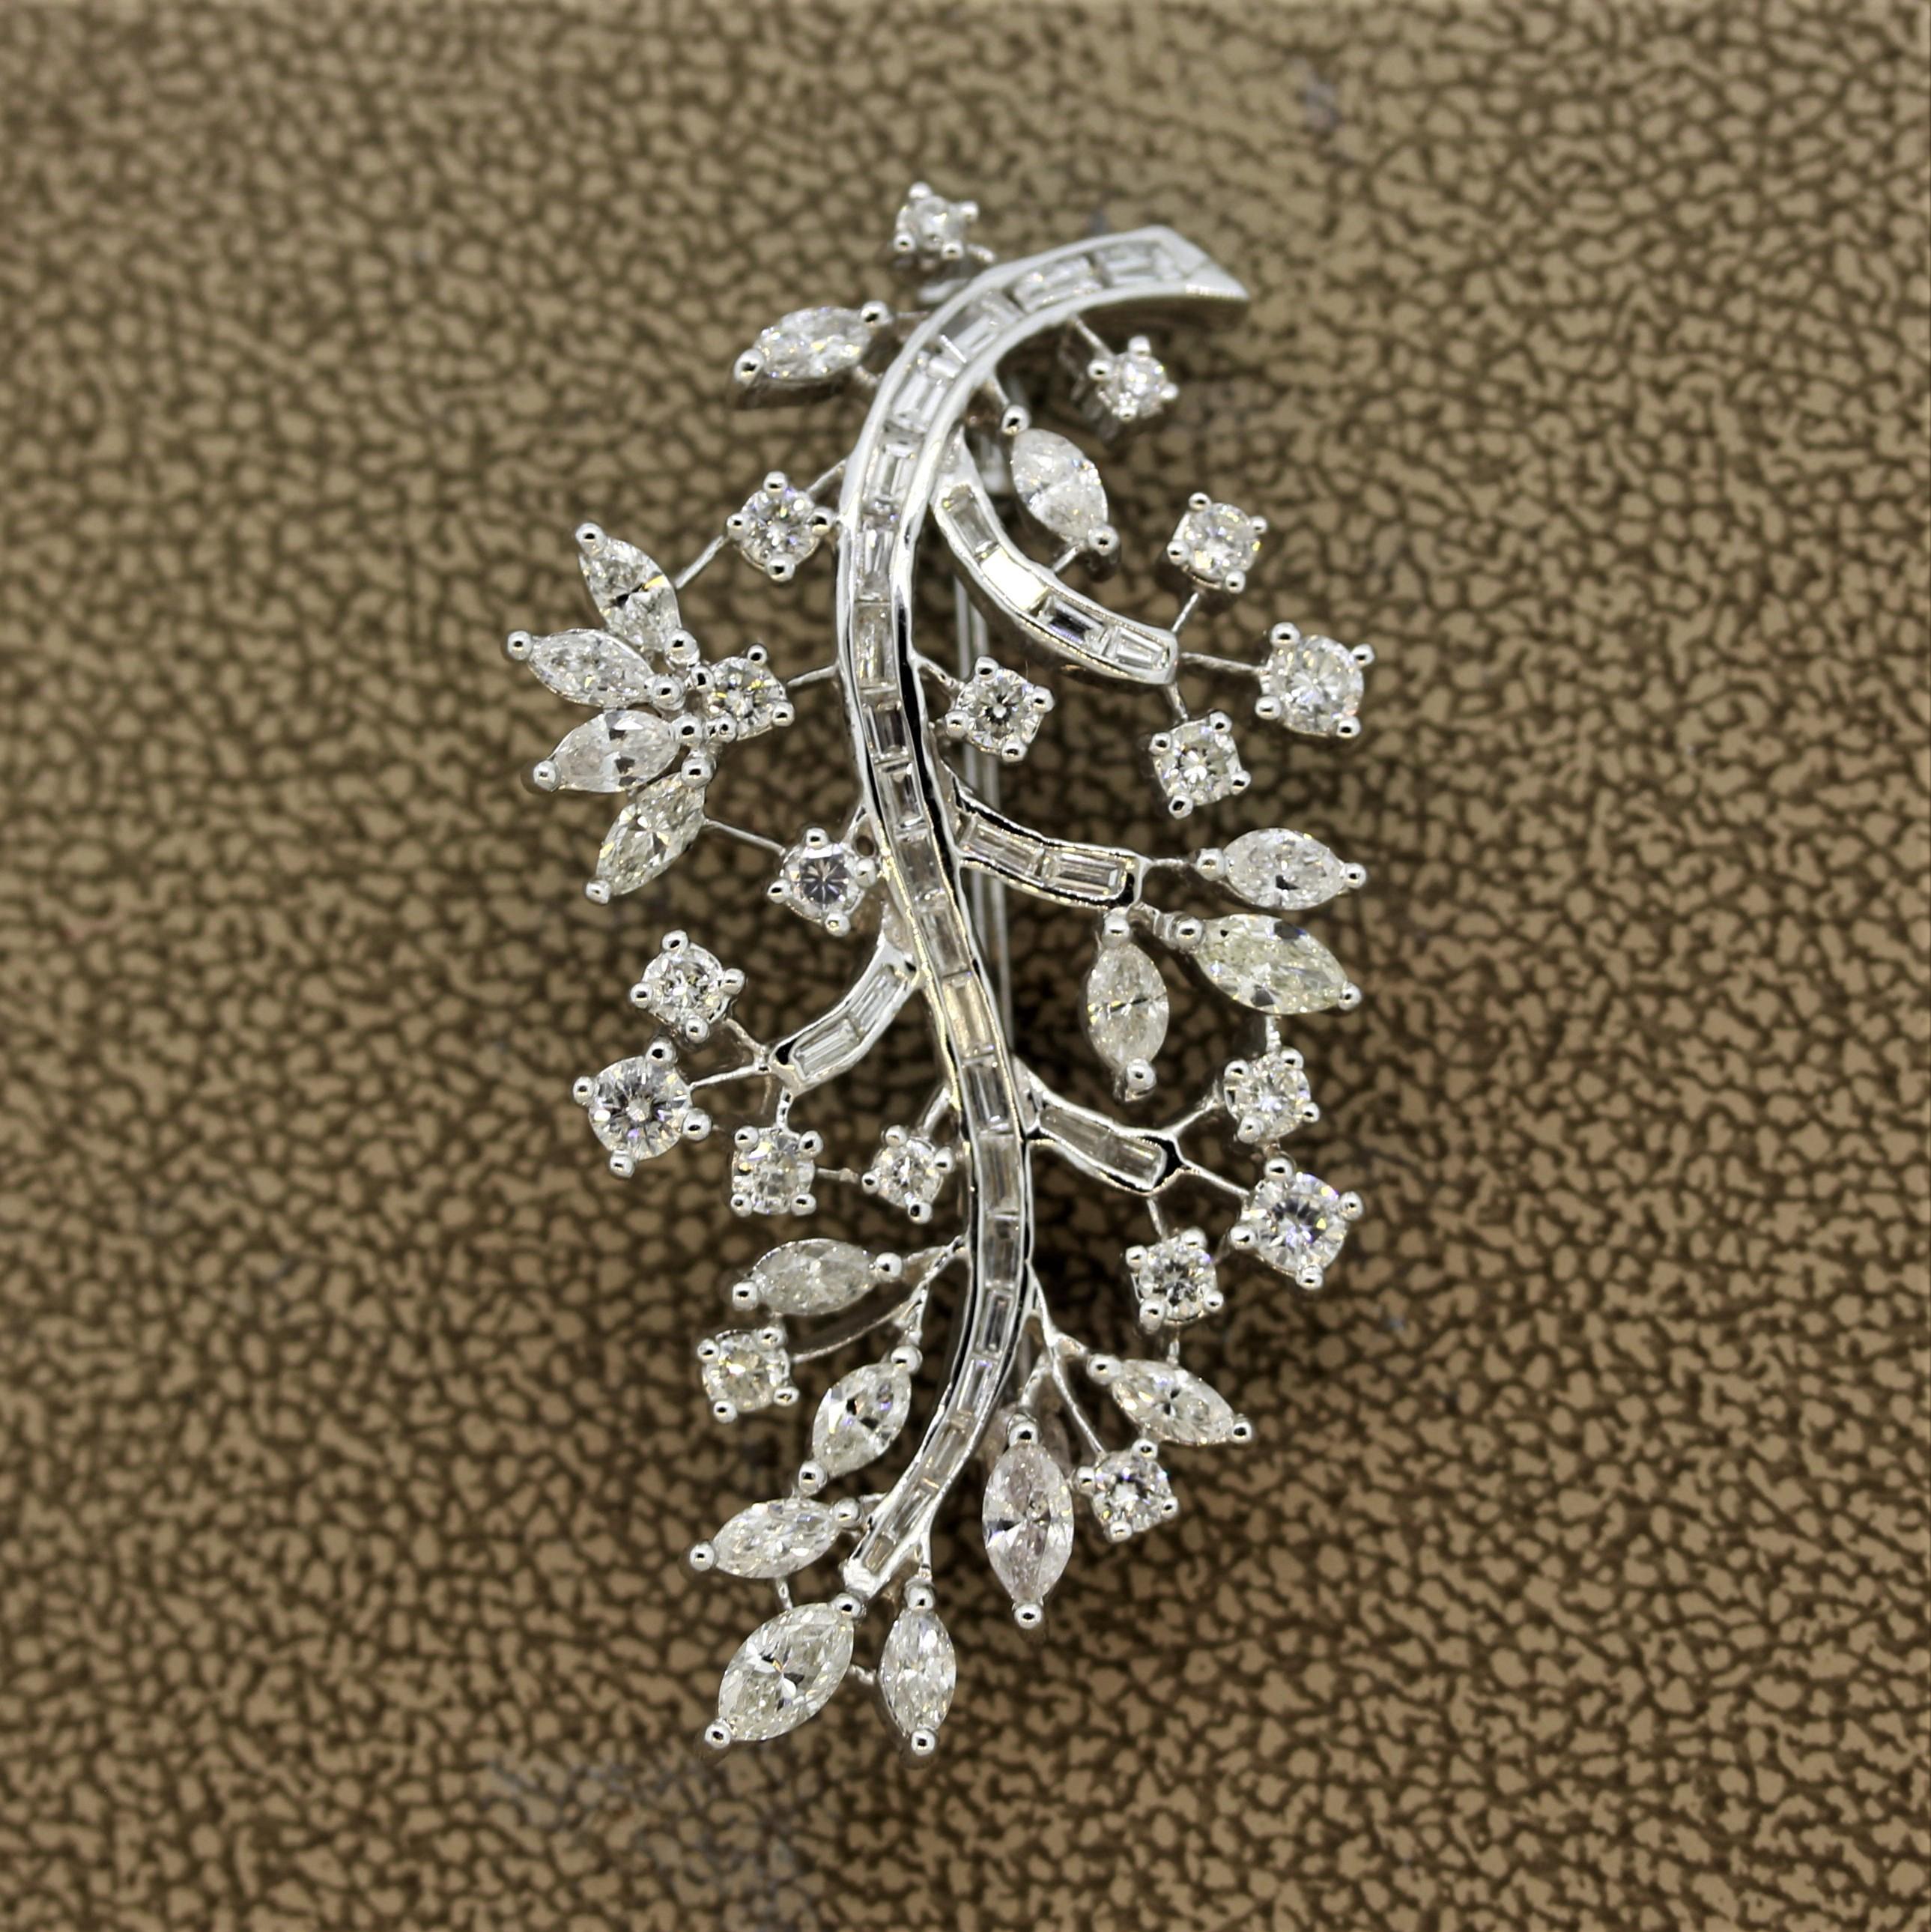 A spray brooch featuring 4.48 carats of round, baguette and marquise shaped diamonds. They are arranged in a floral pattern depicting growth. Made in 18k white gold and ready to be worn with any outfit.

Length: 1.7 inches